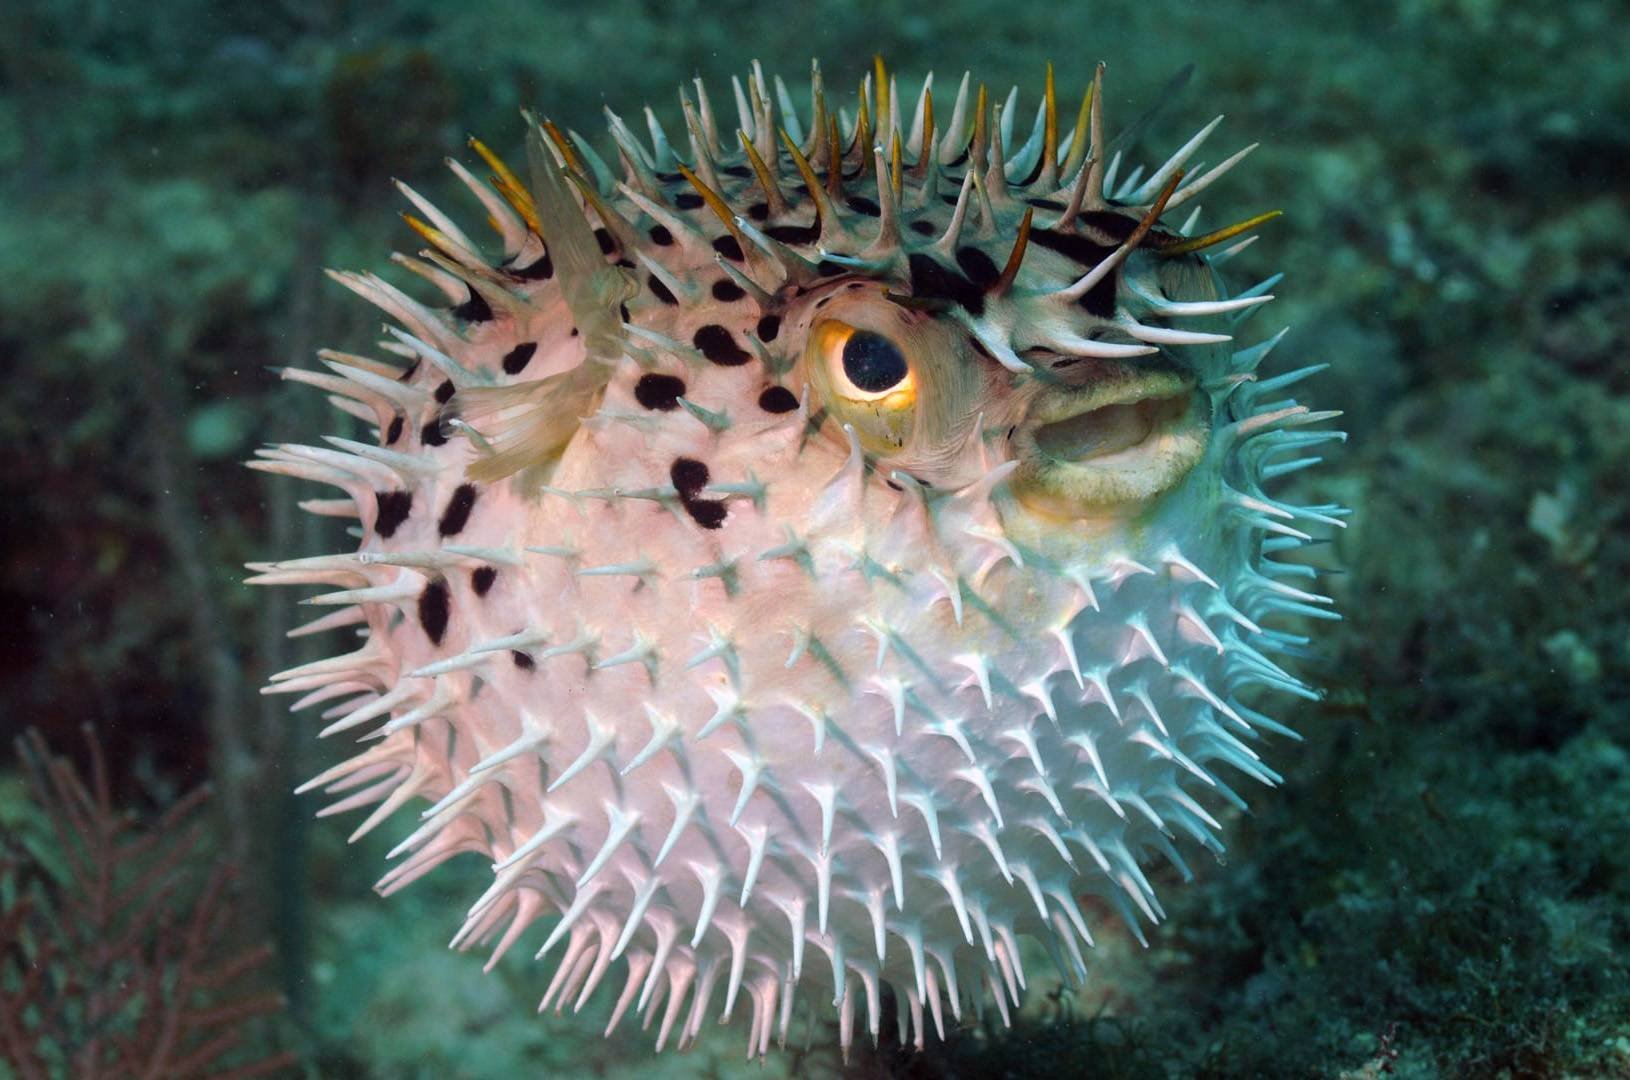 What is probably the most famous Representative of the Pufferfish?